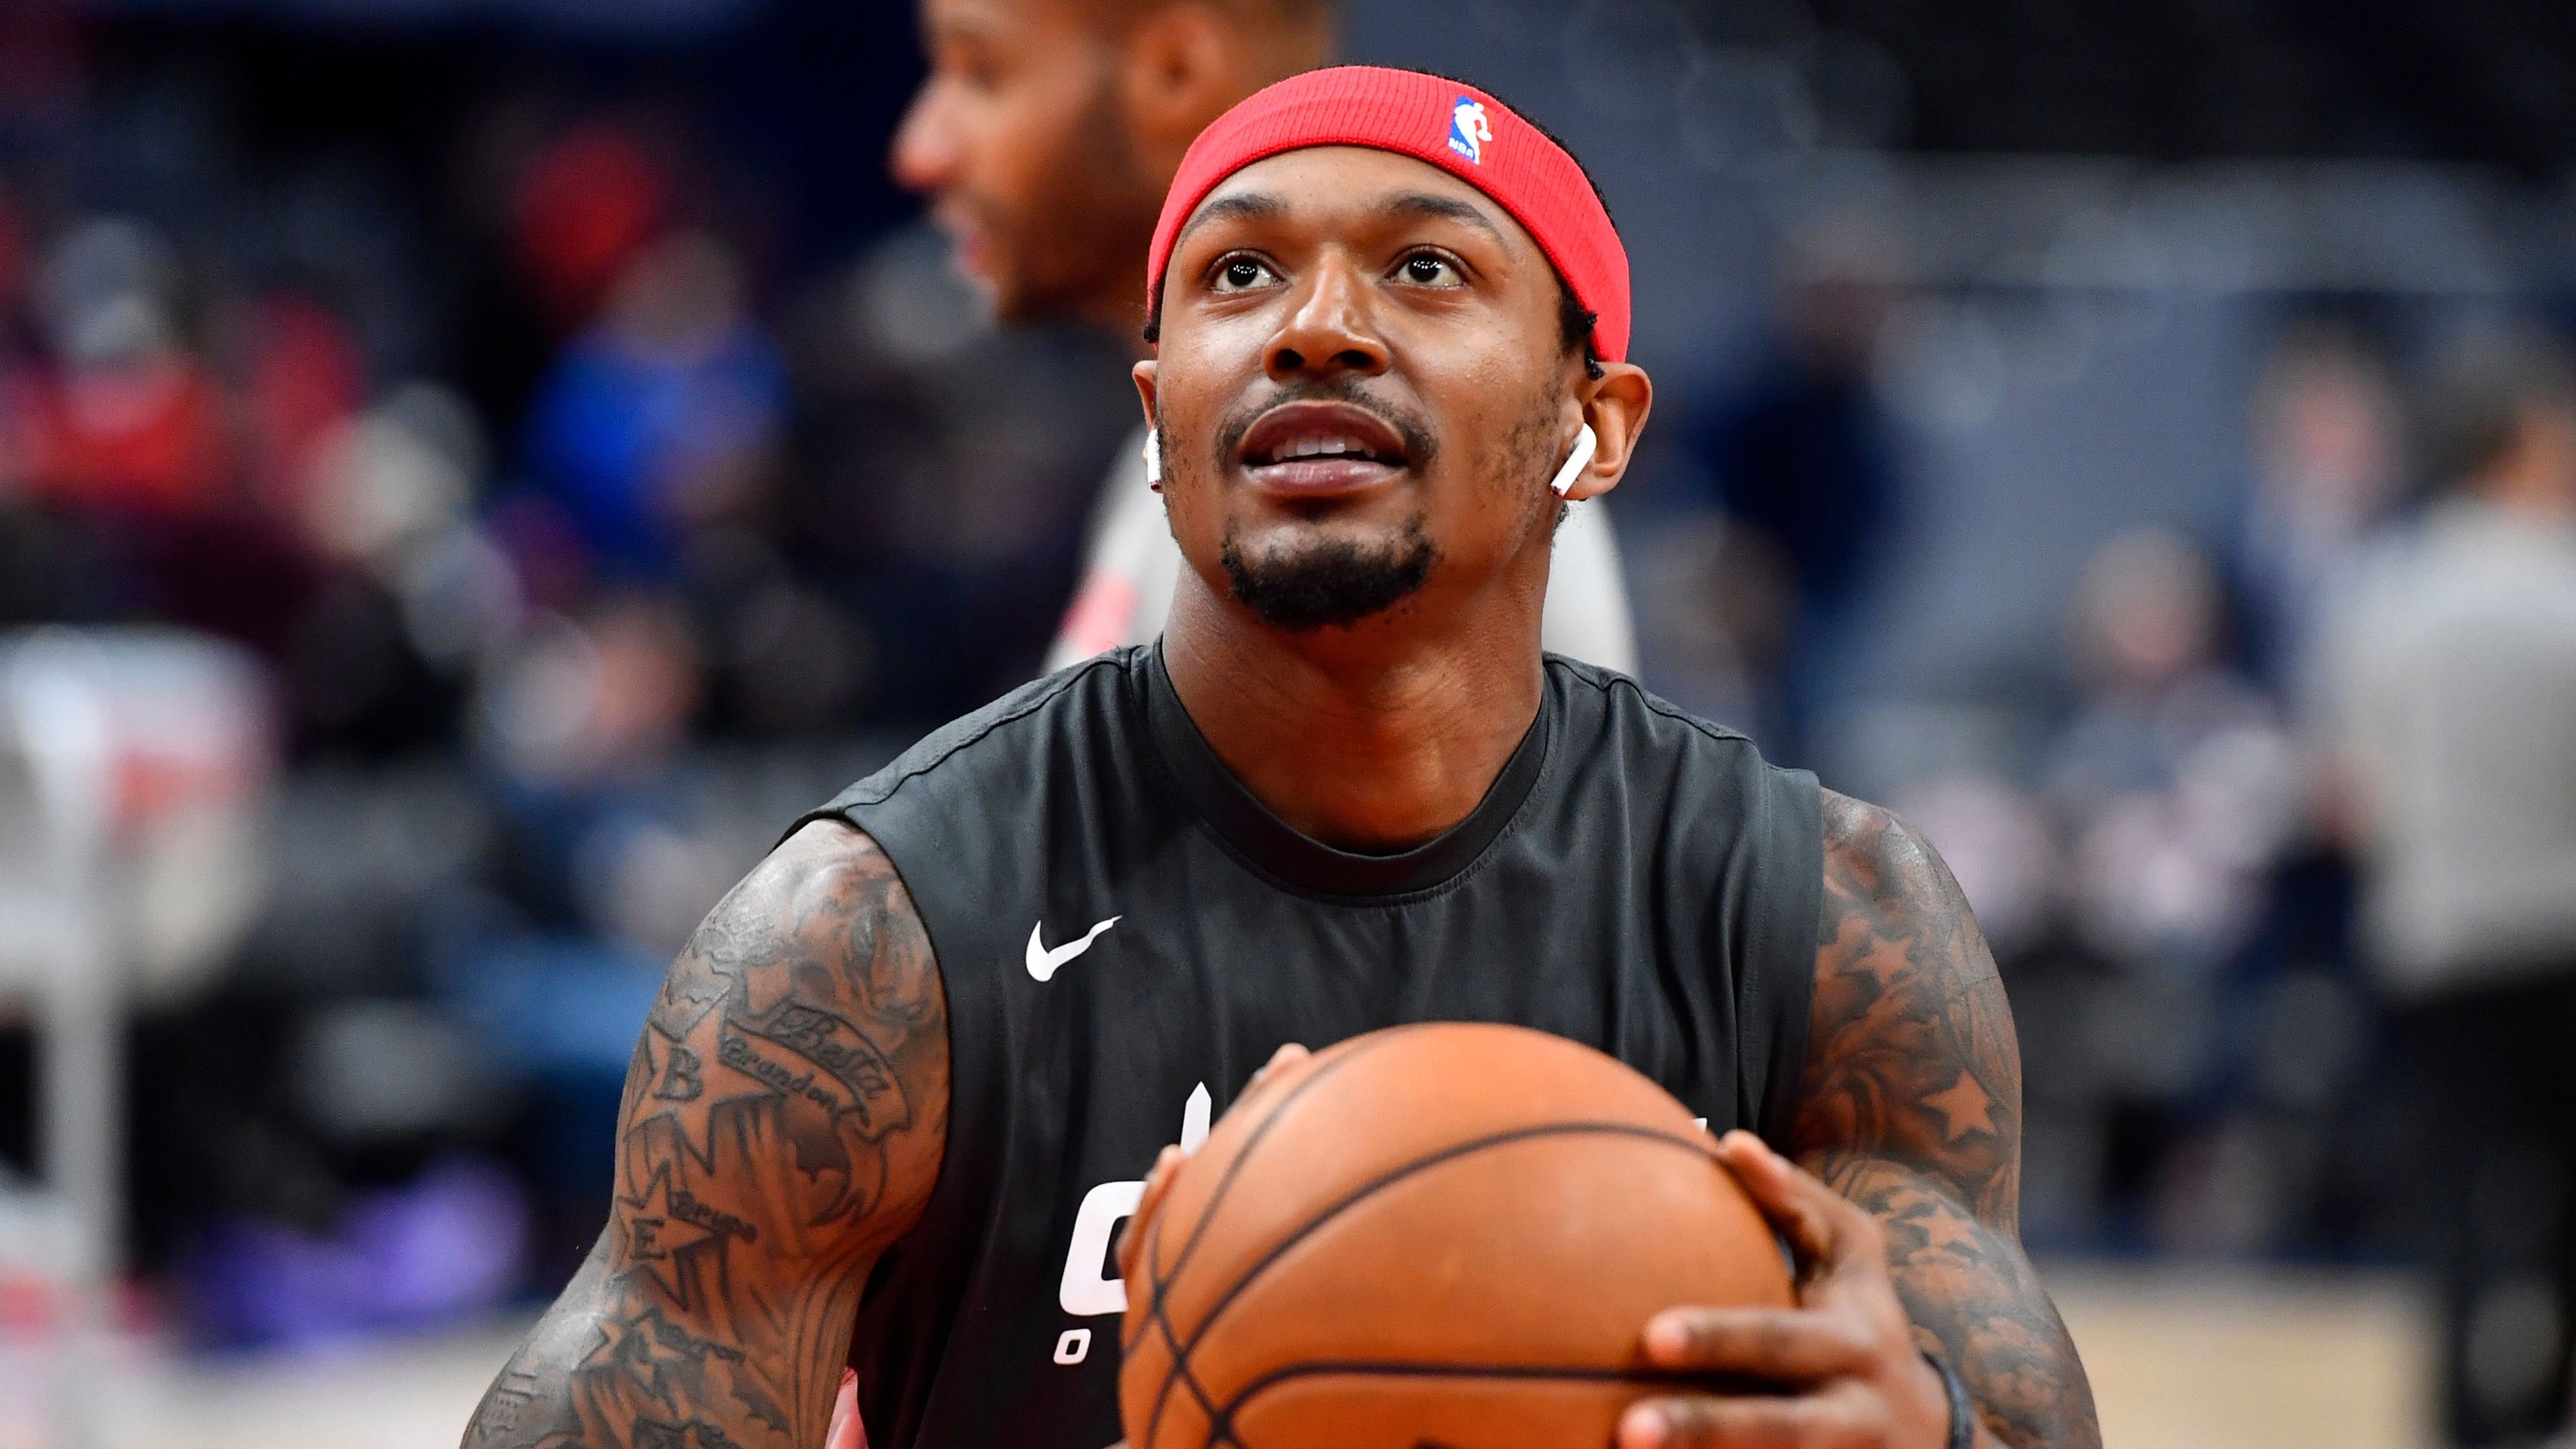 Beal Calls Brooks Not Coming Back ‘Tough' But He Trusts Wizards' Vision